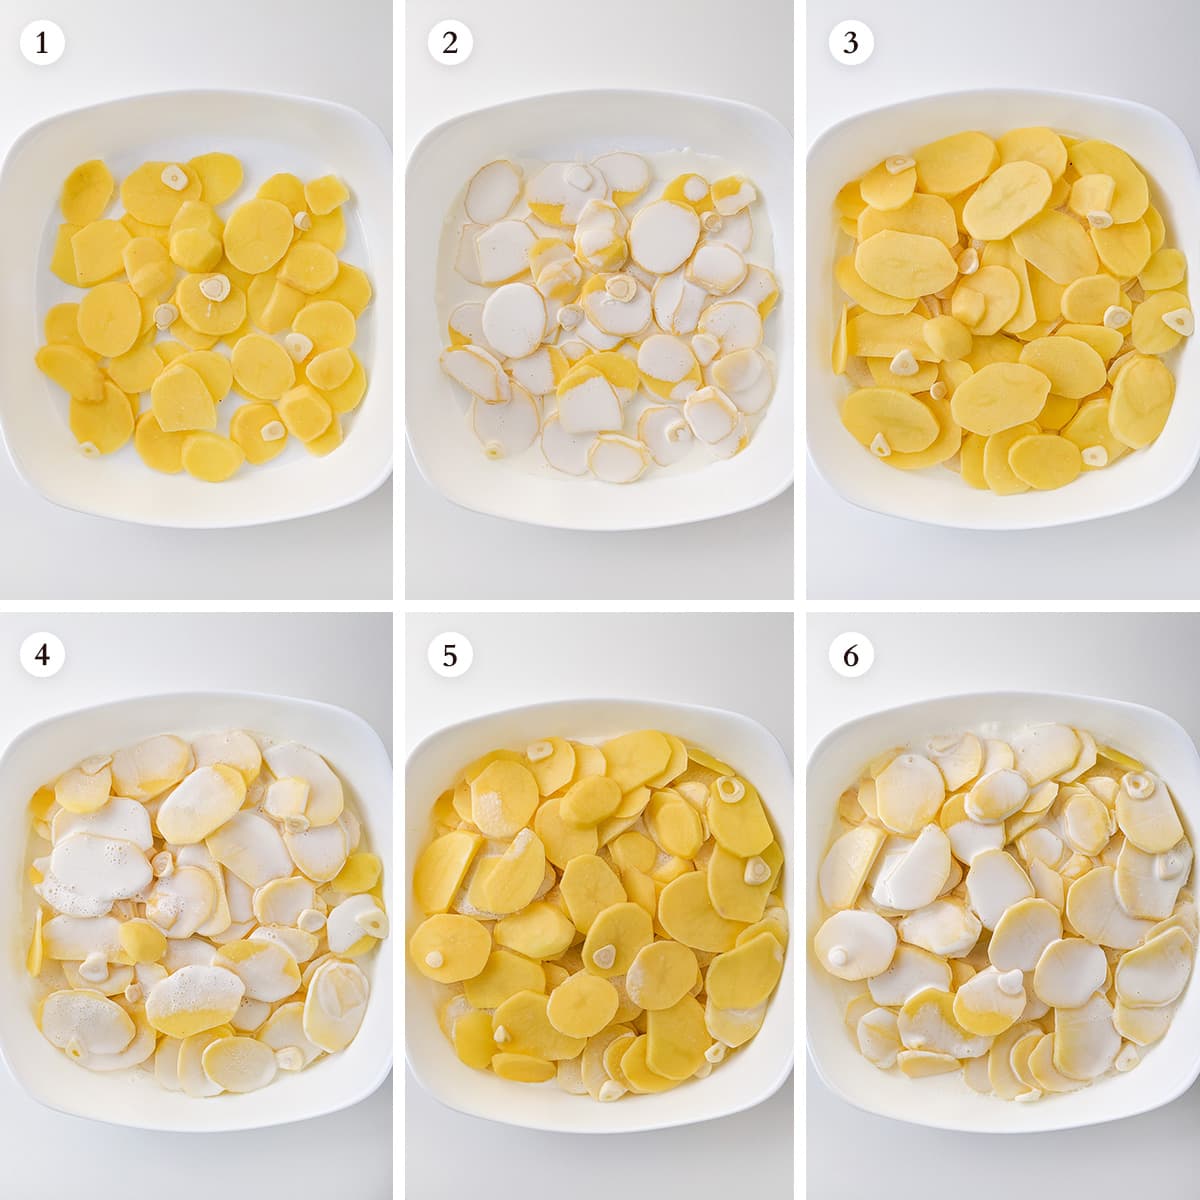 Step-by-step how to make 4-ingredients potato bake.